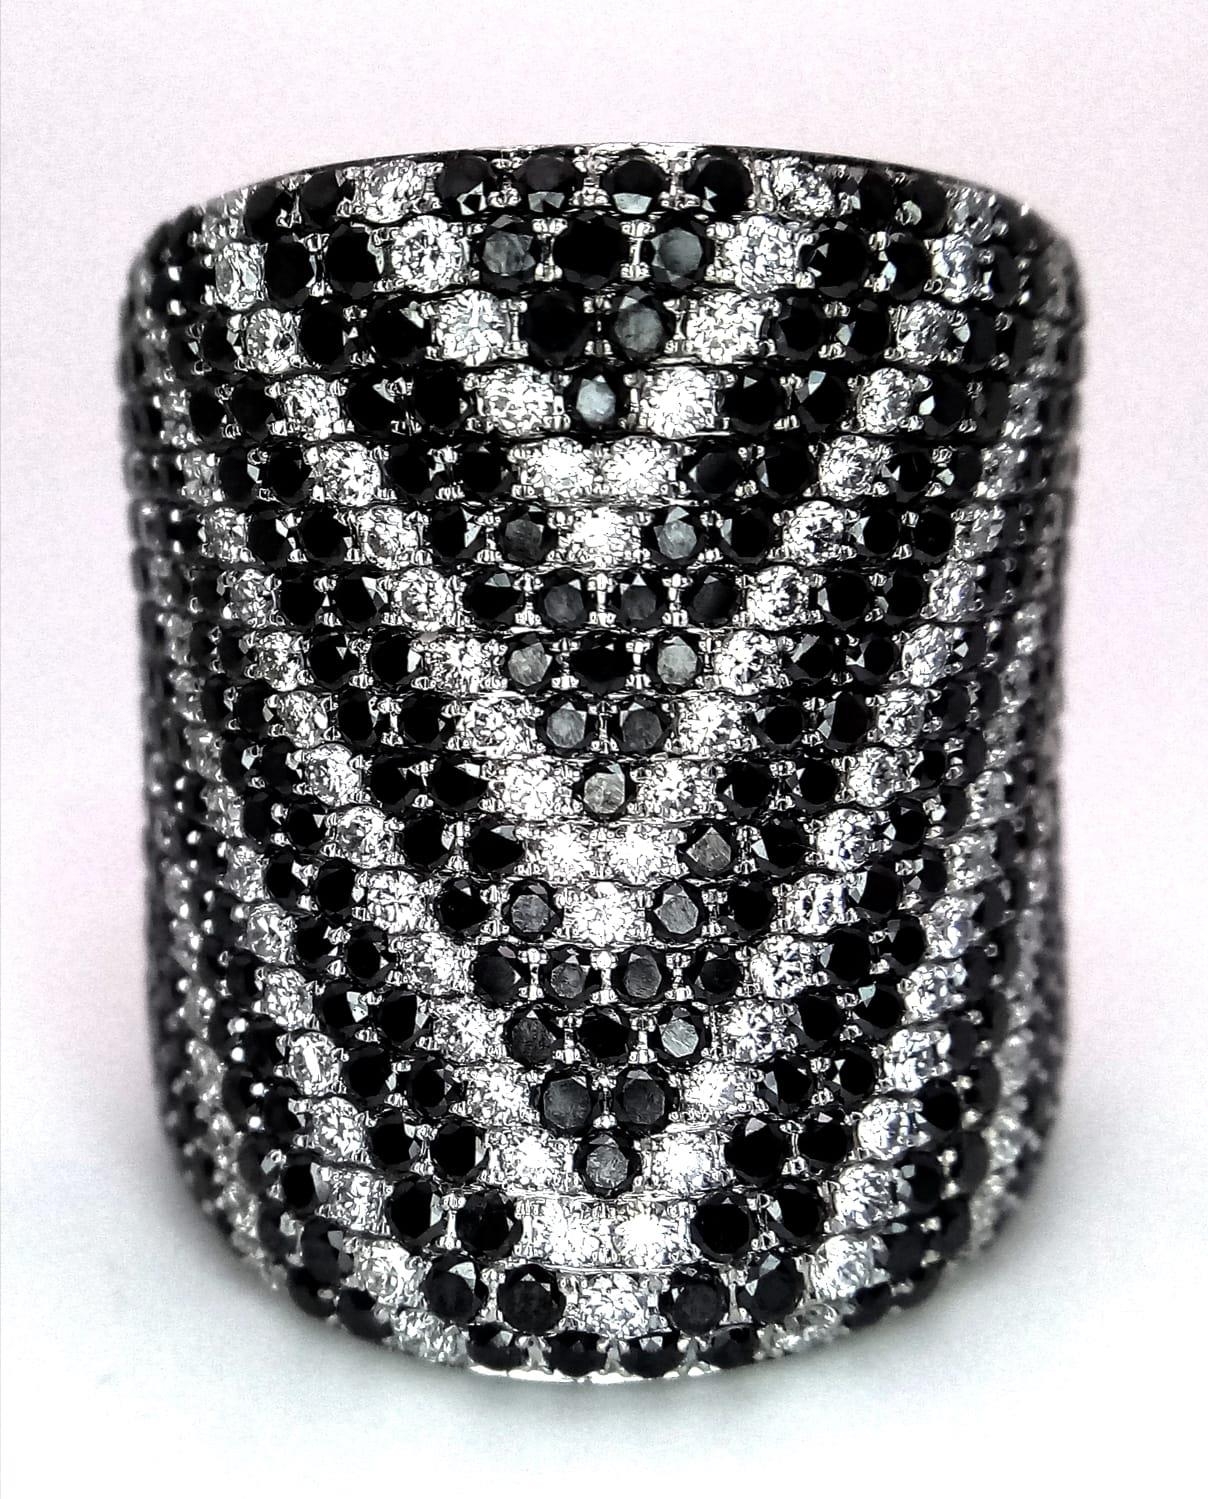 An Incredible Black and White Diamond 18K Gold Dress Ring. This cylindrical masterpiece has over 200